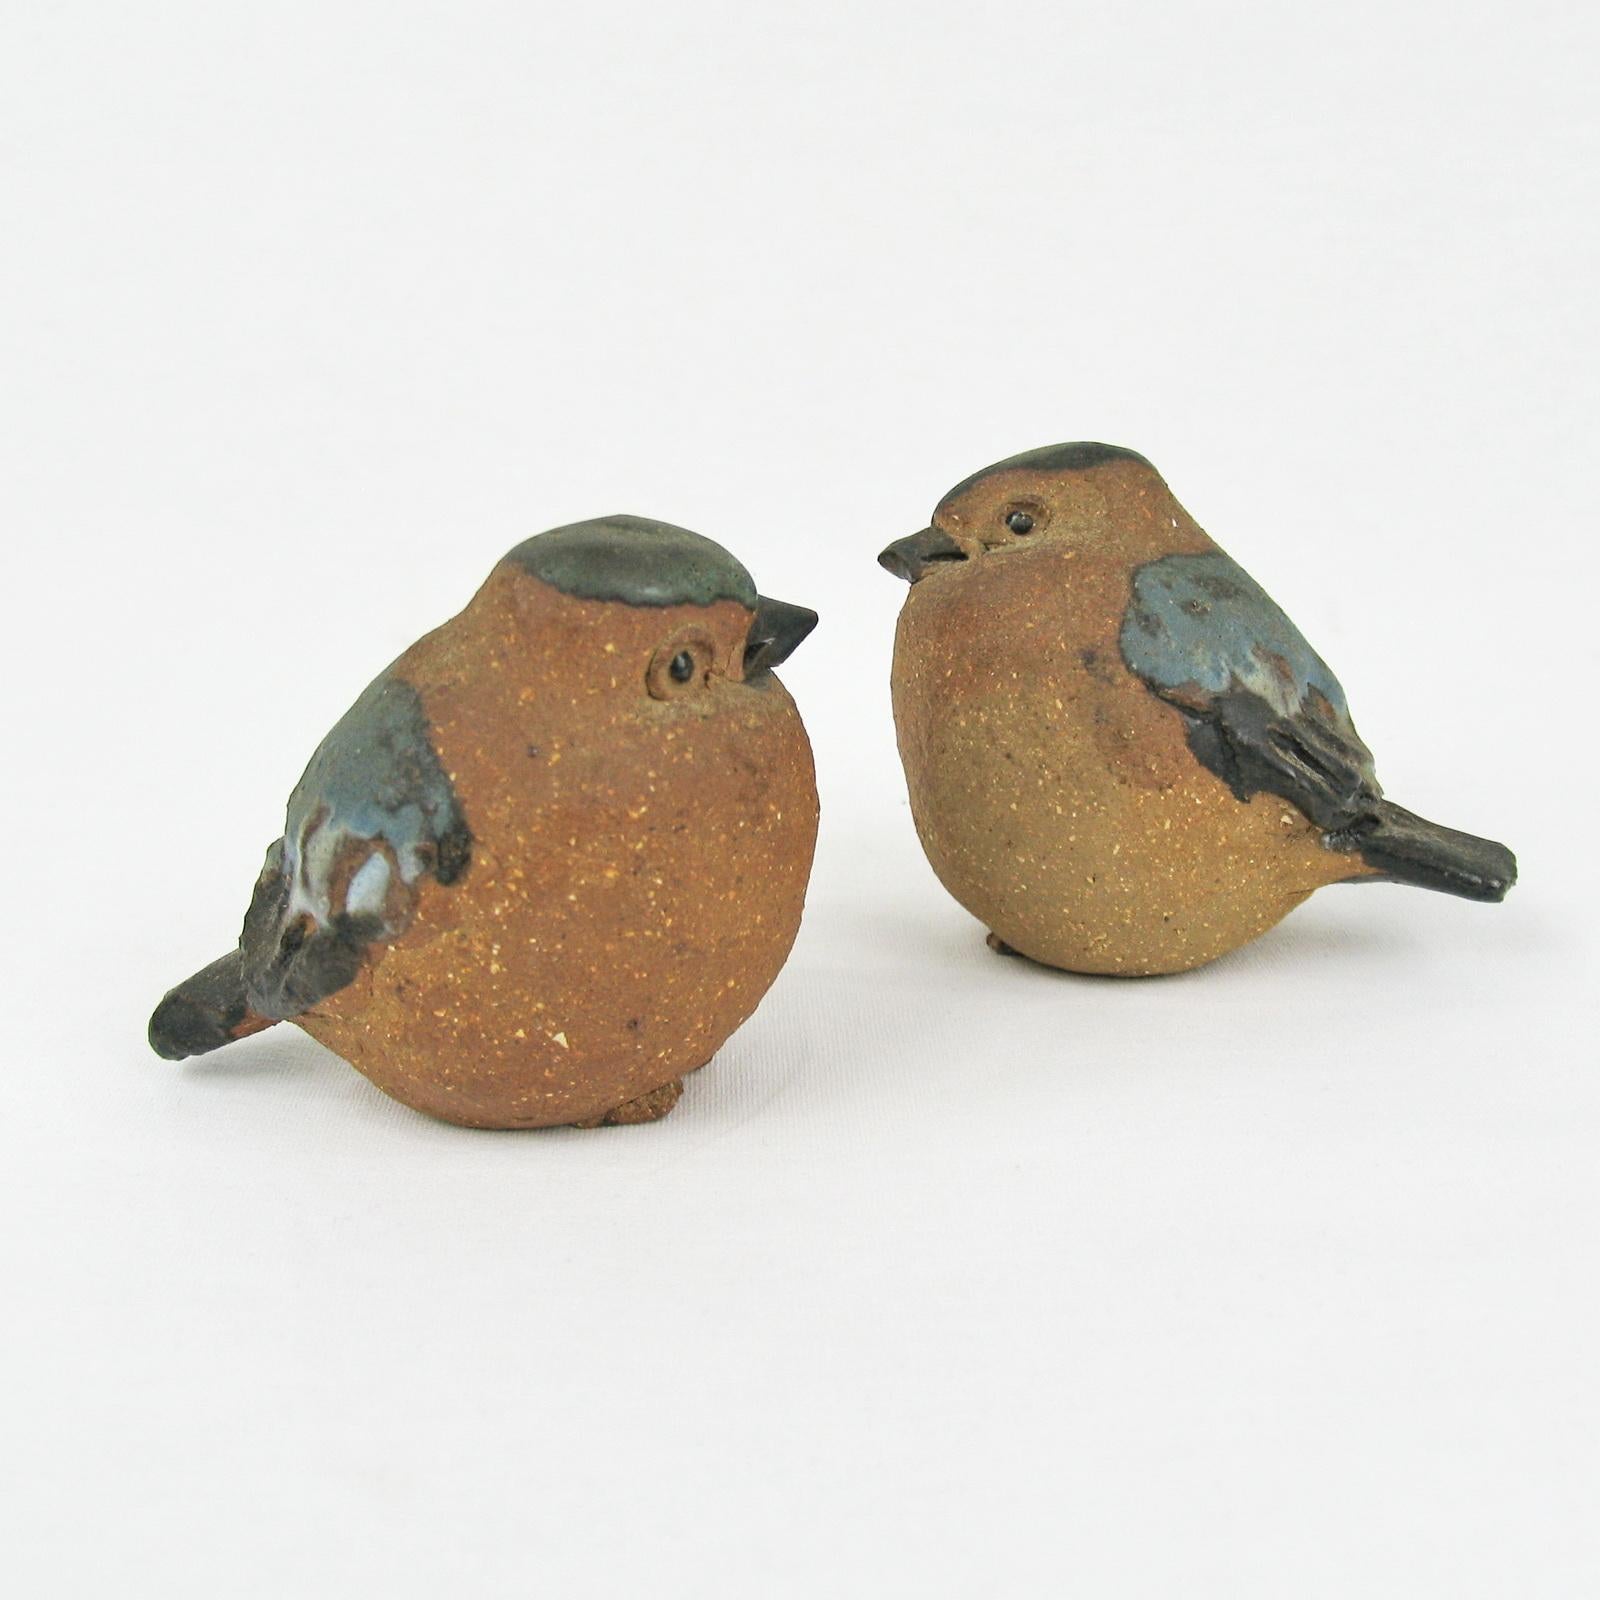 Mid-Century Modern Scandinavian ceramic birds figurines, Sweden, 1960s.
A pair of joyful birds, sparrows, made of stoneware, in natural color, partly glazed in beautiful shades of blue. Artist's monogram impressed under the bottom. In excellent